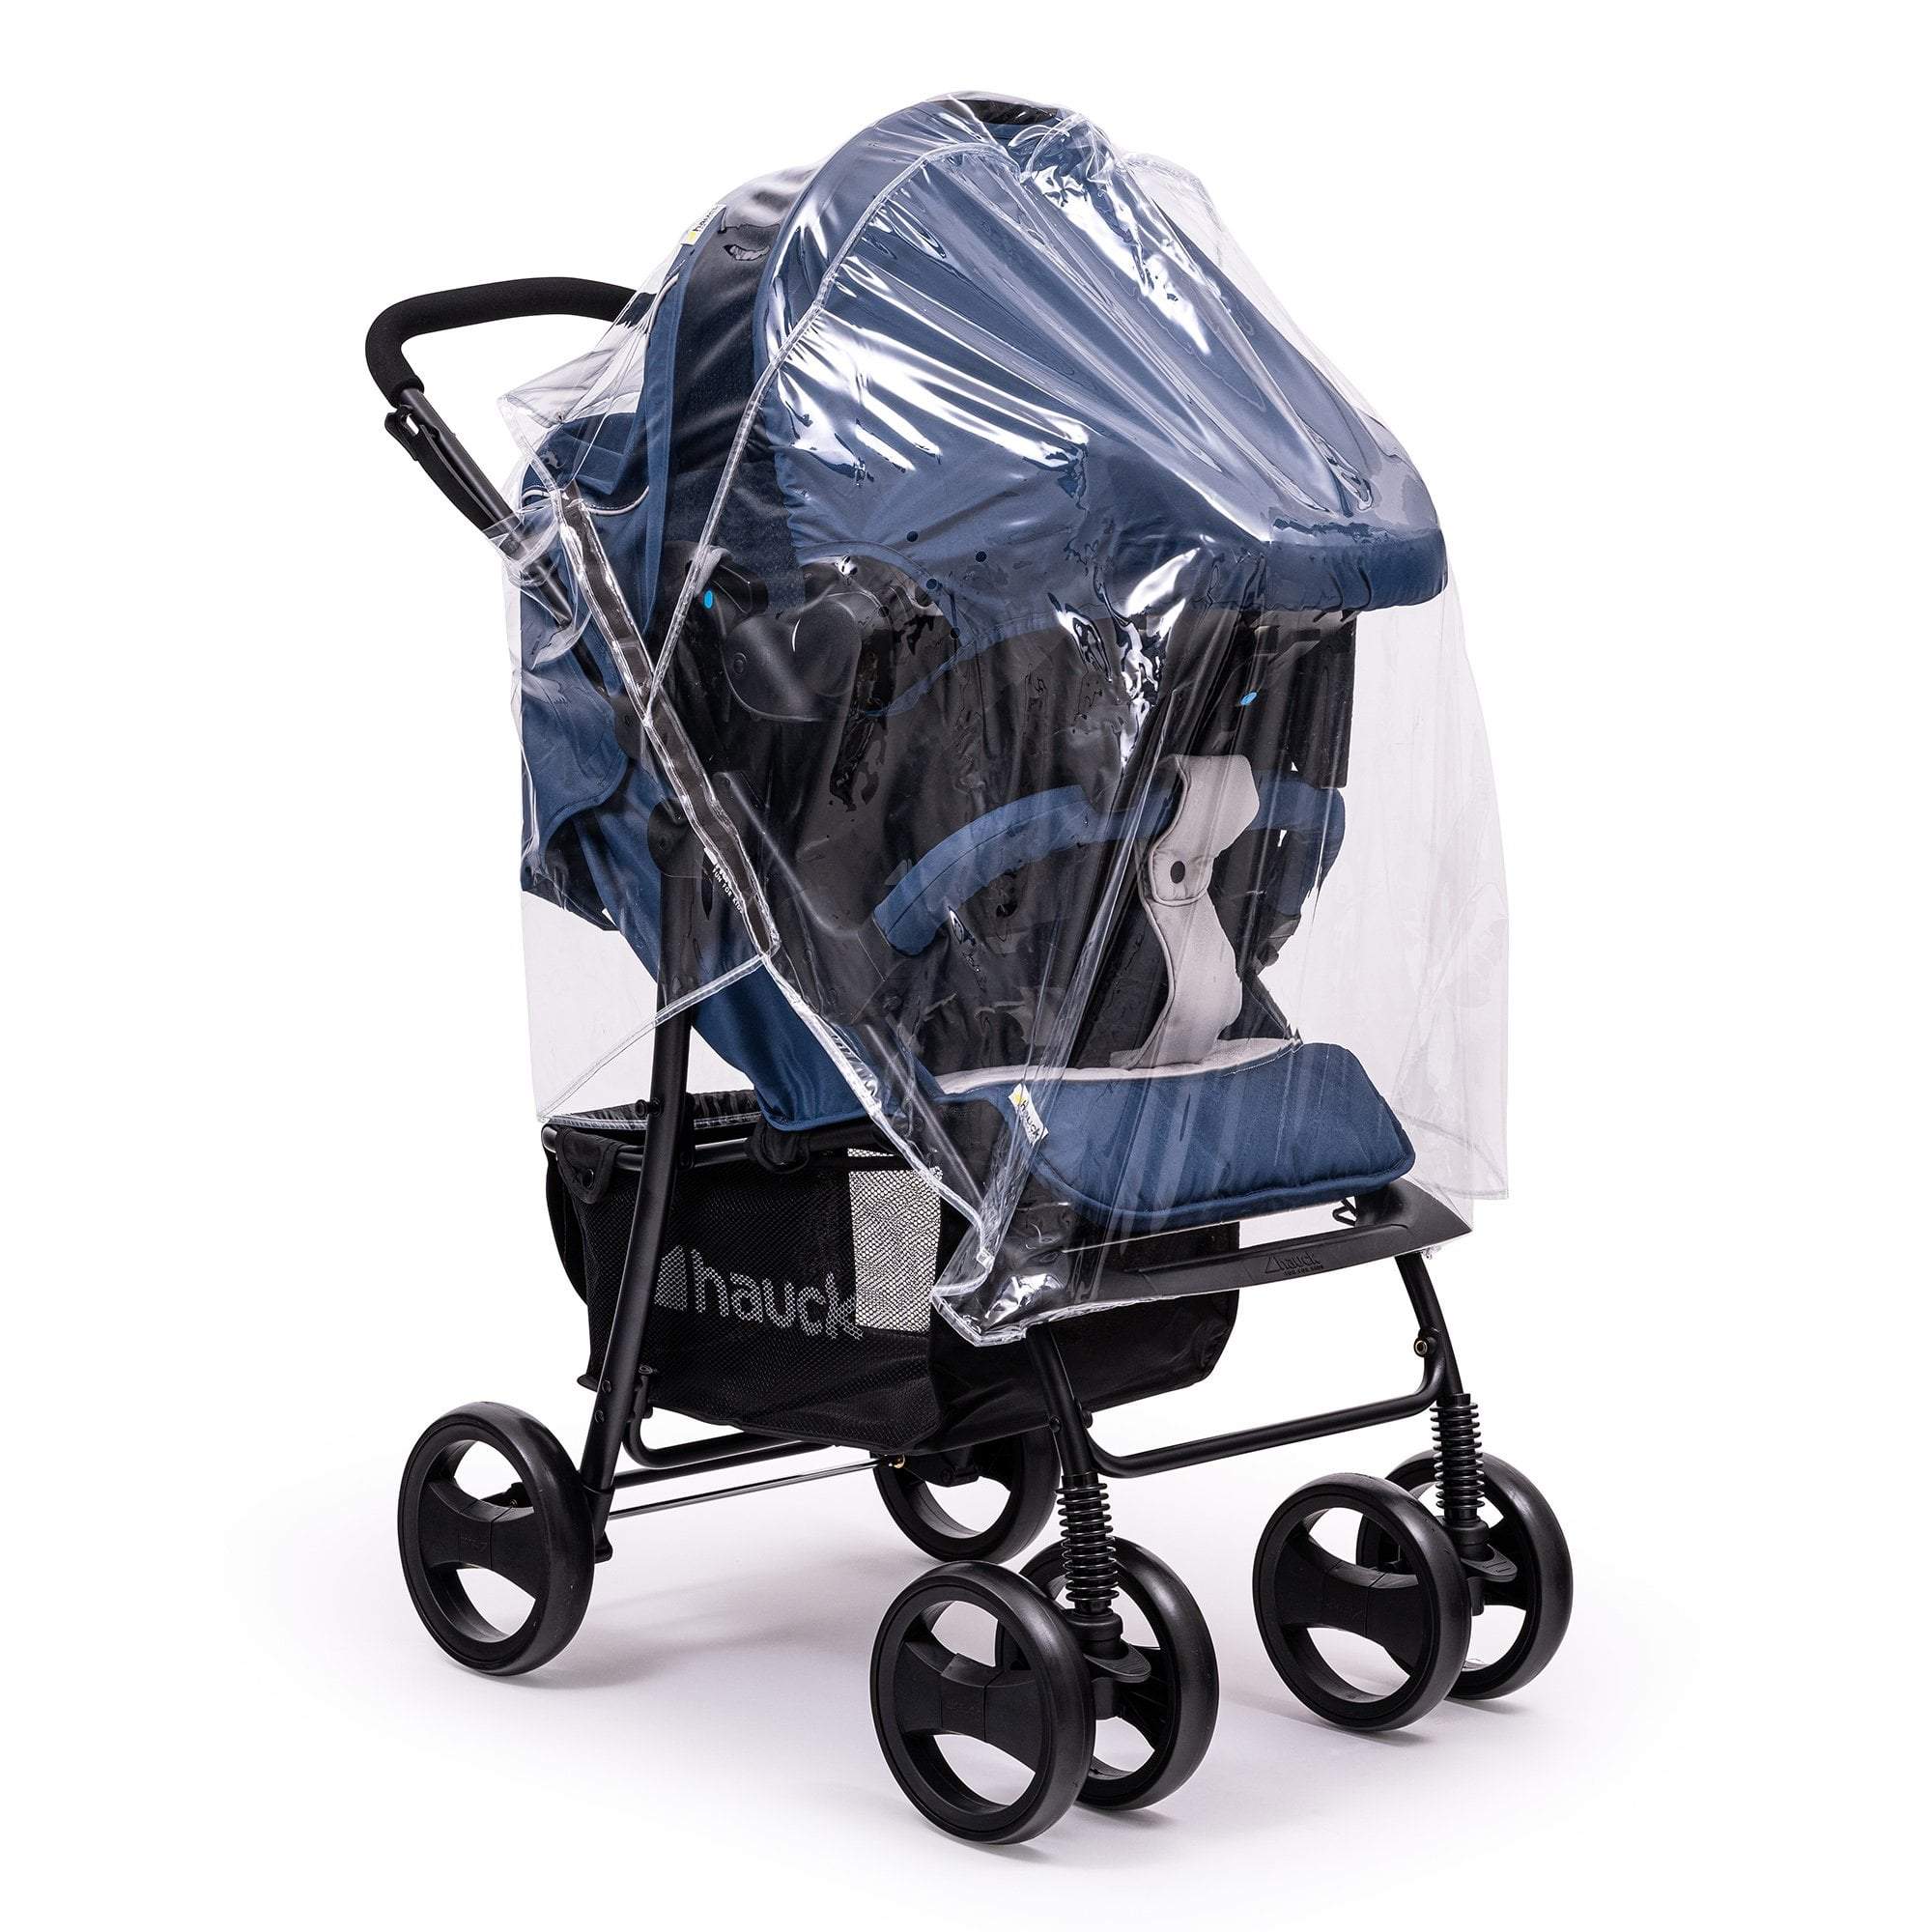 Travel System Raincover Compatible with Maclaren - Fits All Models - For Your Little One